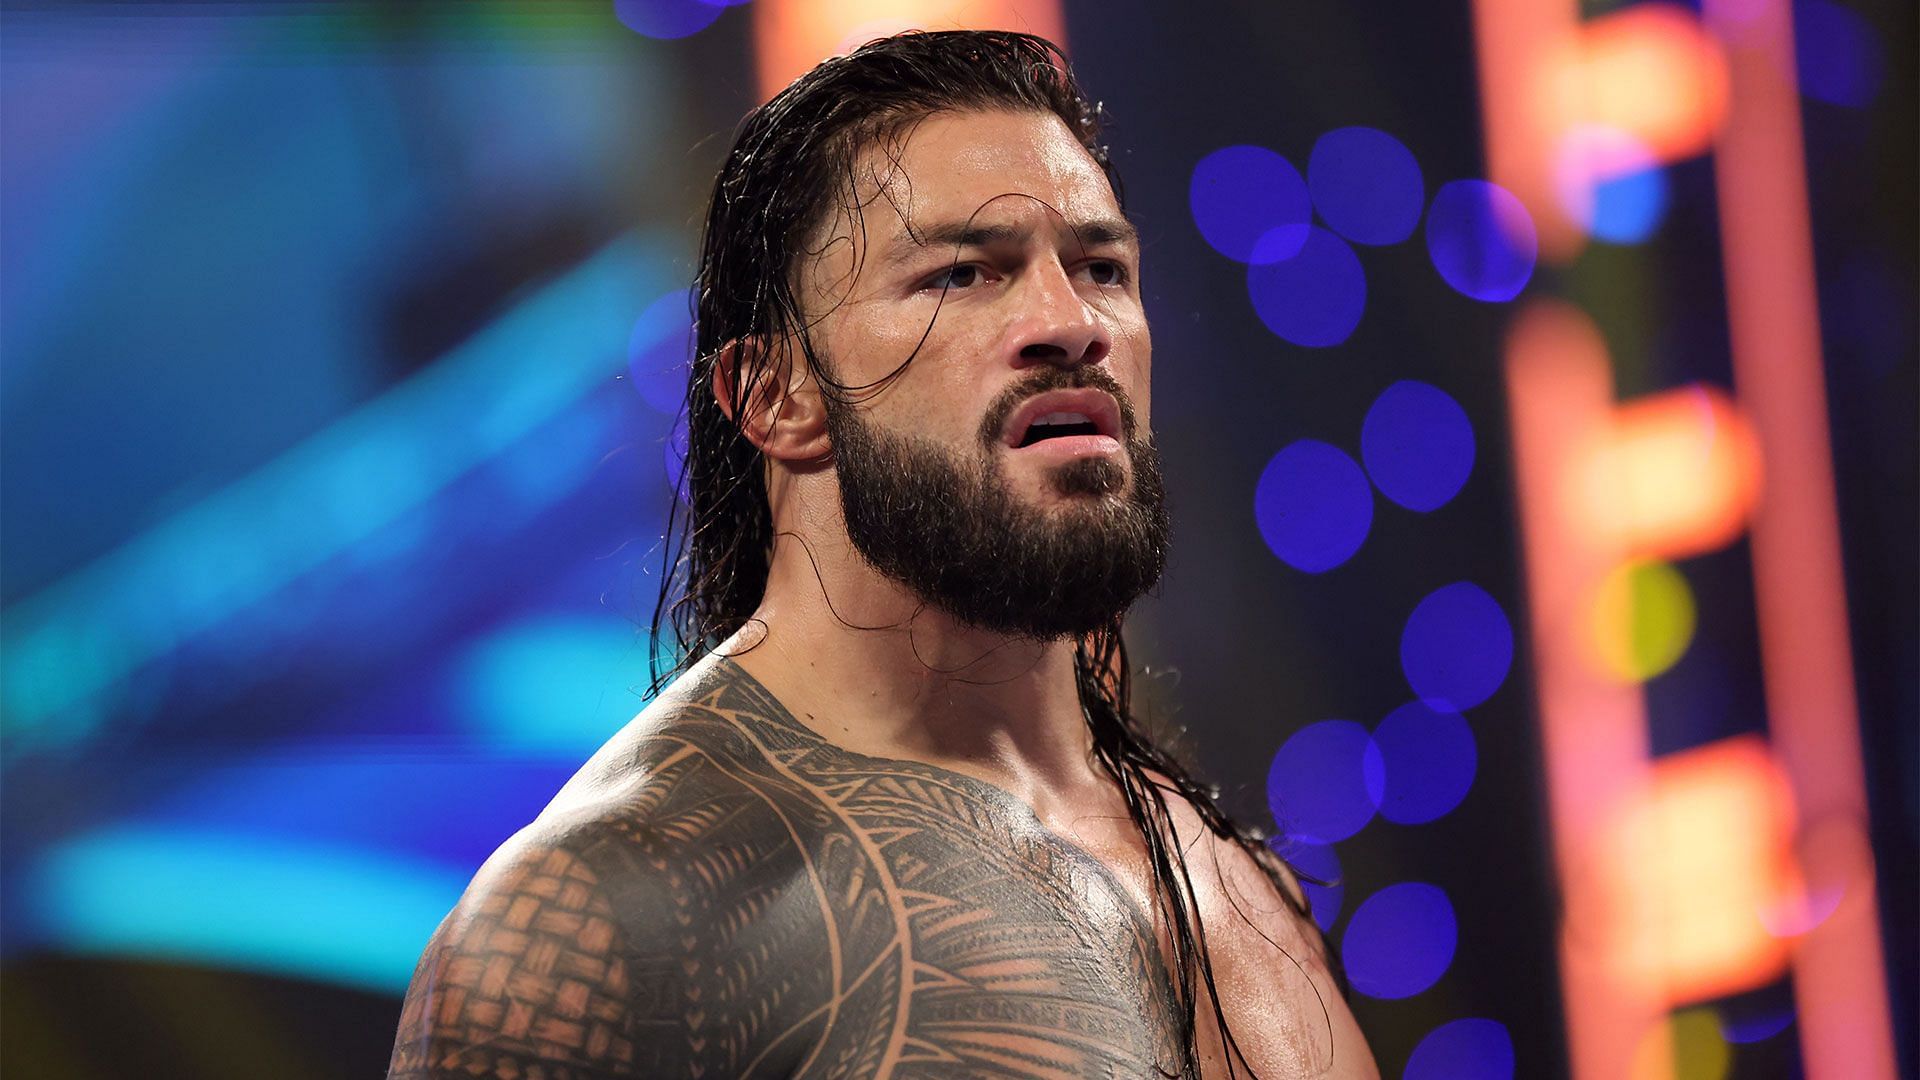 Could Roman Reigns miss another premium live event this year?